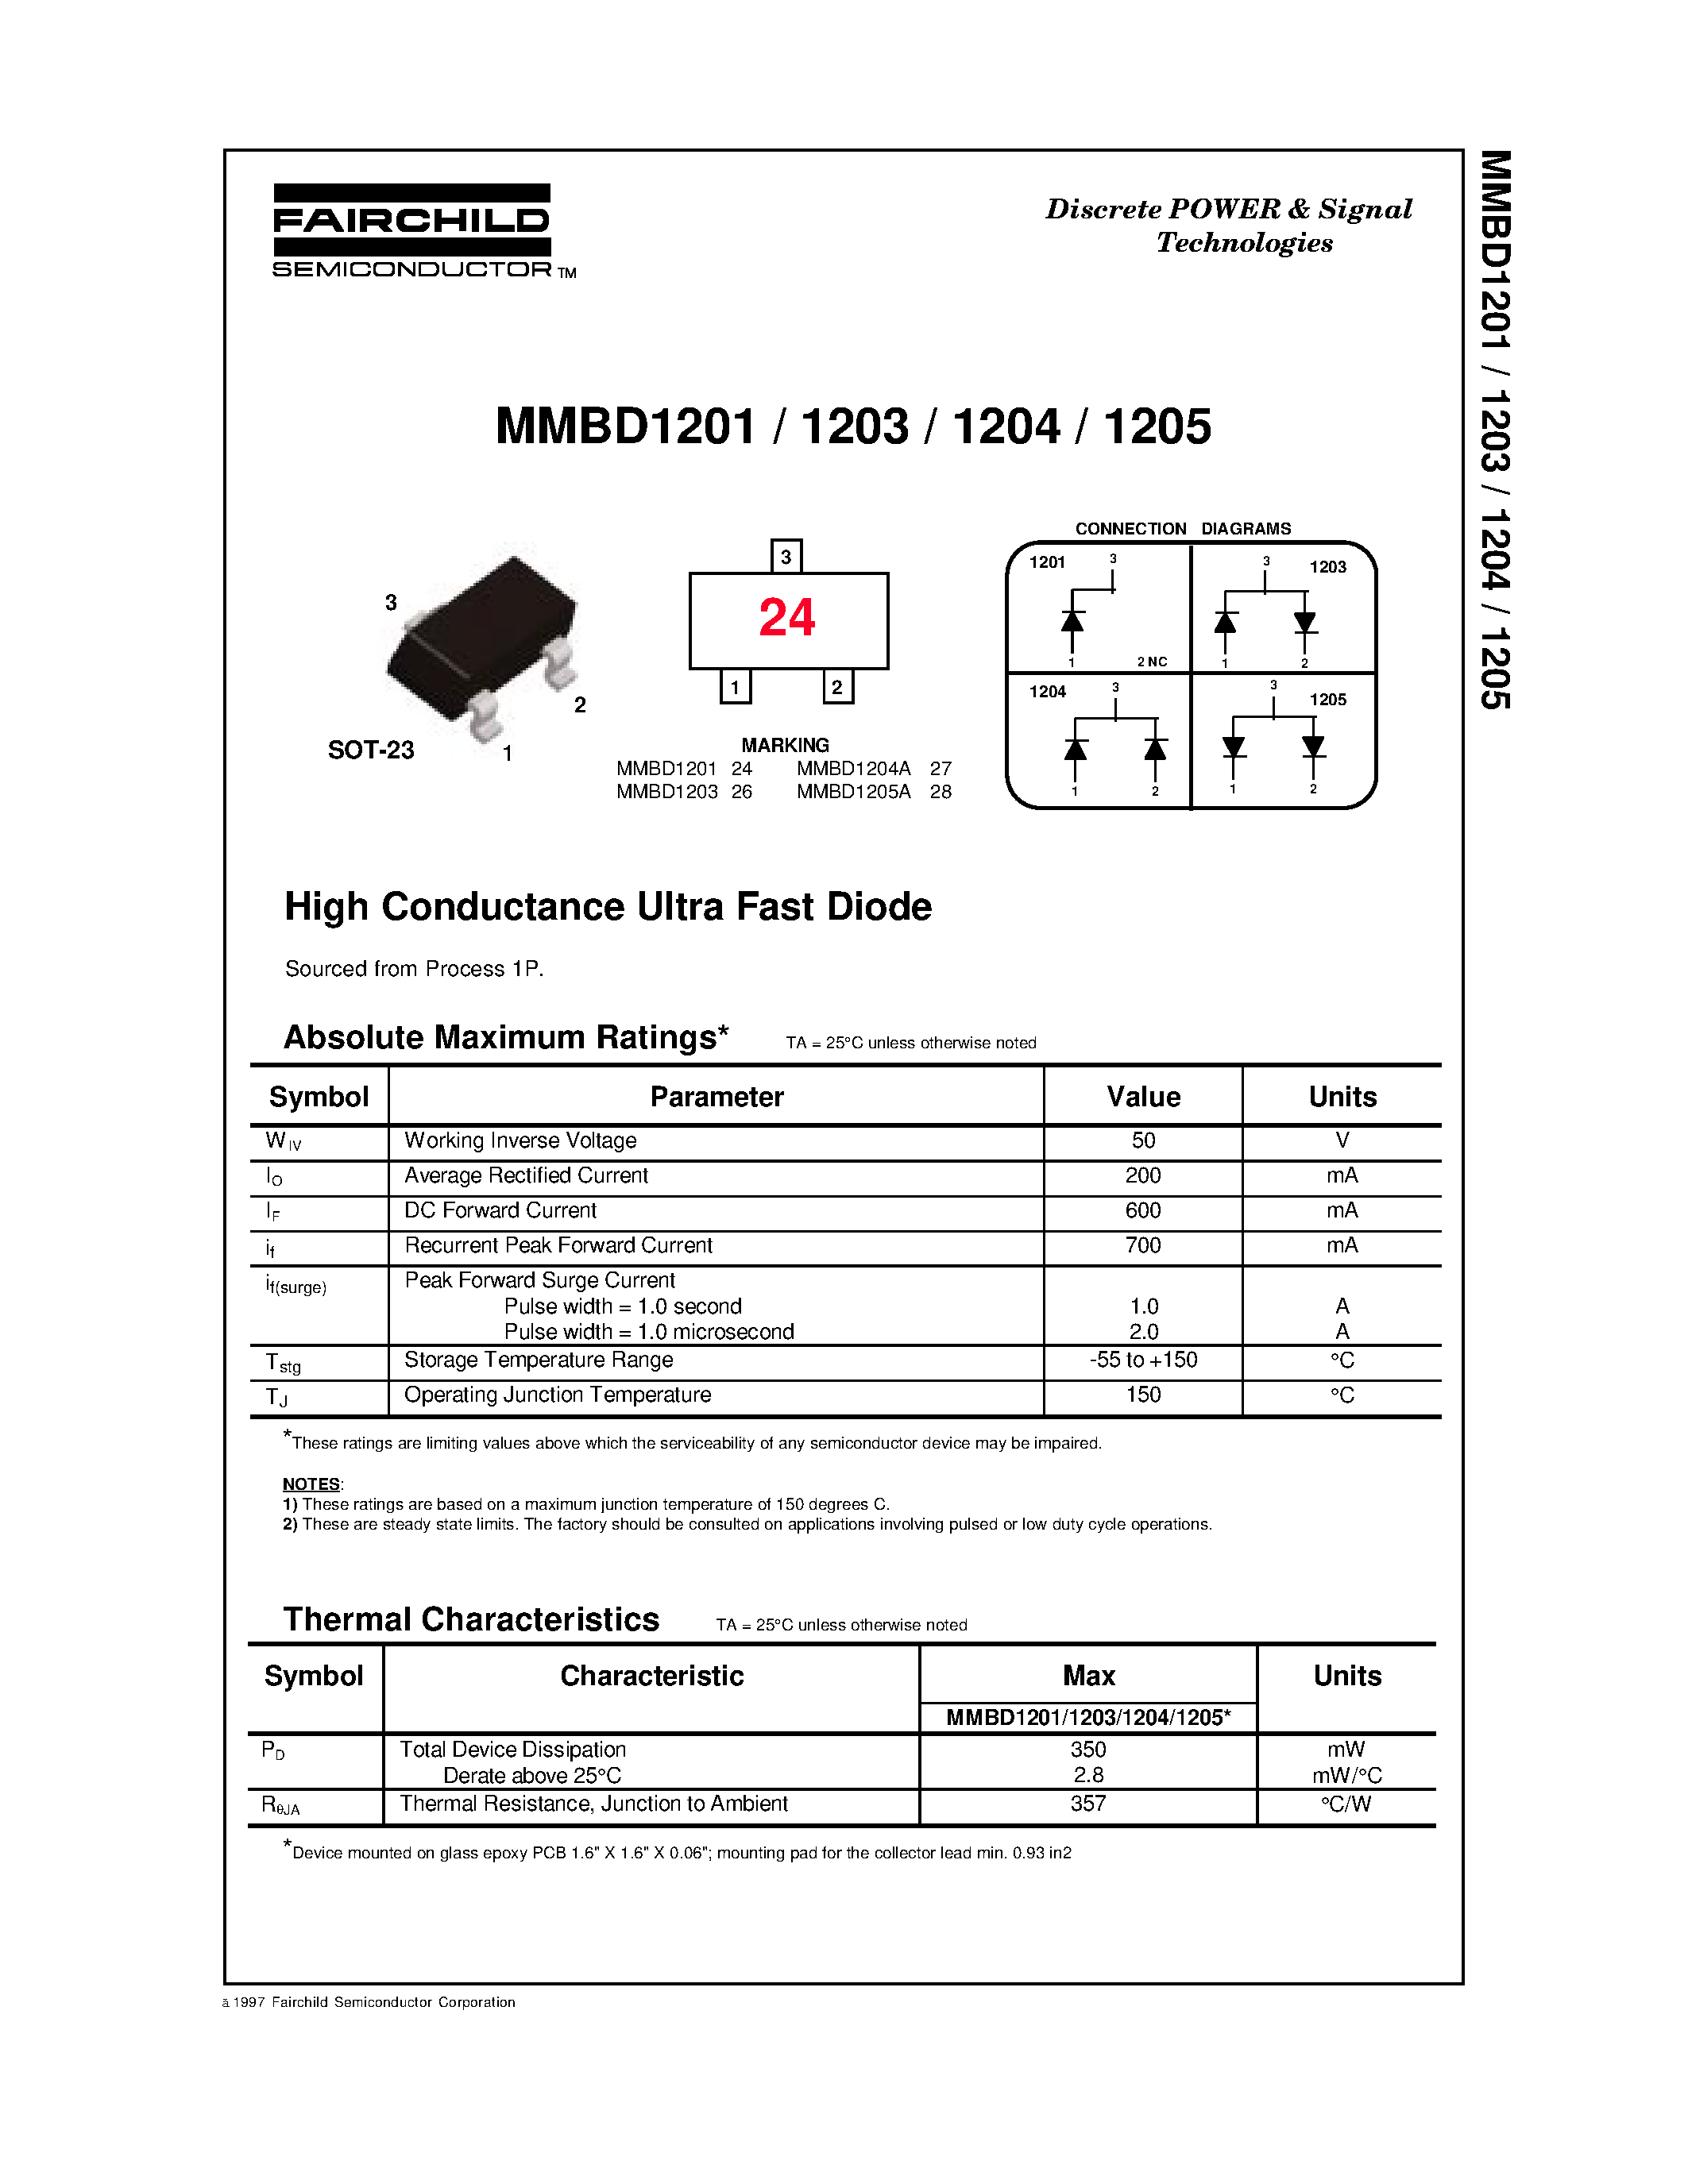 Datasheet MMBD1204 - High Conductance Ultra Fast Diode page 1